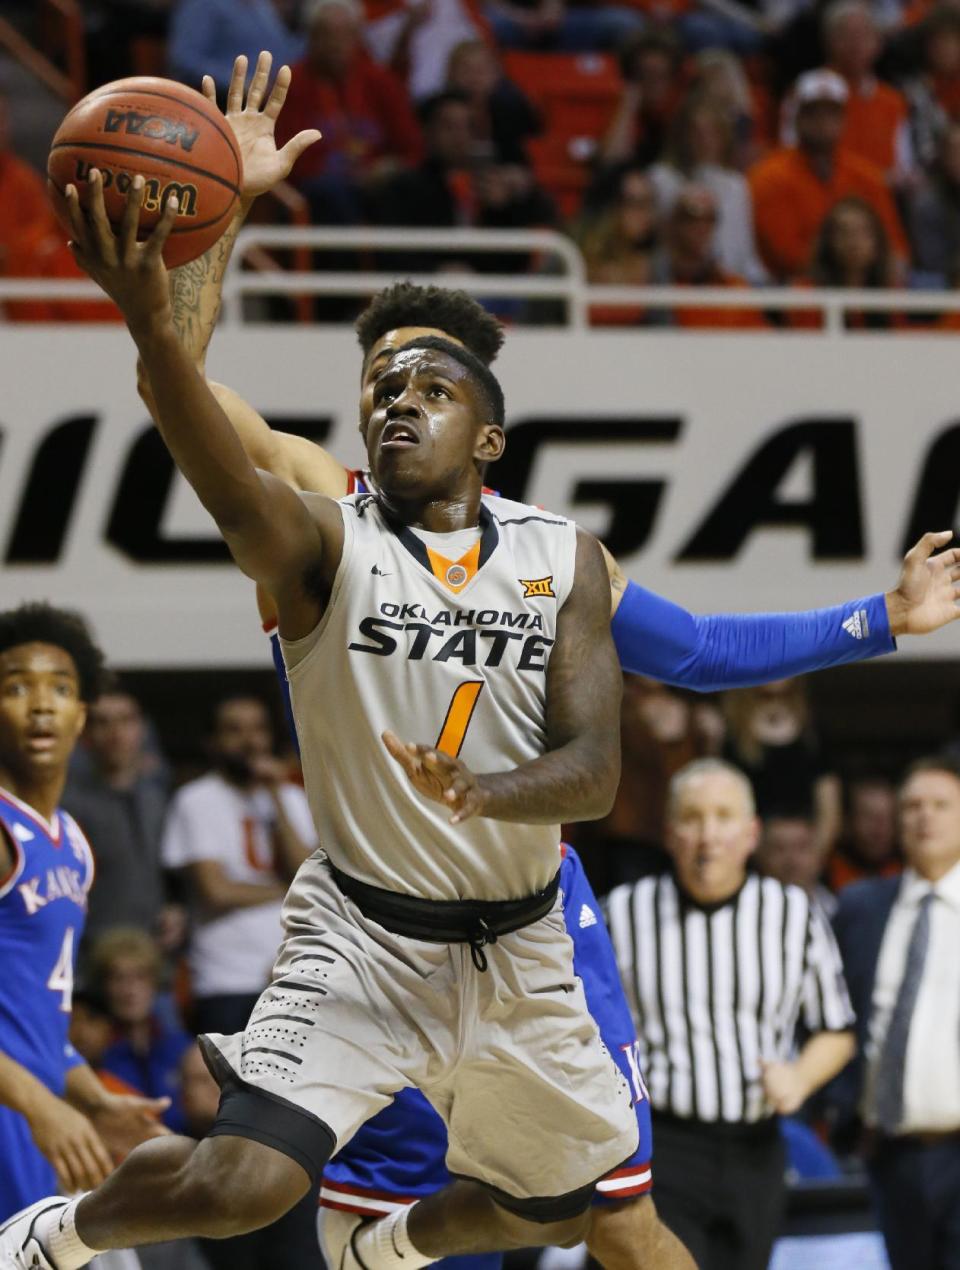 Oklahoma State guard Jawun Evans (1) shoots in front of Kansas guard Frank Mason III, rear, in the first half of an NCAA college basketball game in Stillwater, Okla., Saturday, March 4, 2017. (AP Photo/Sue Ogrocki)